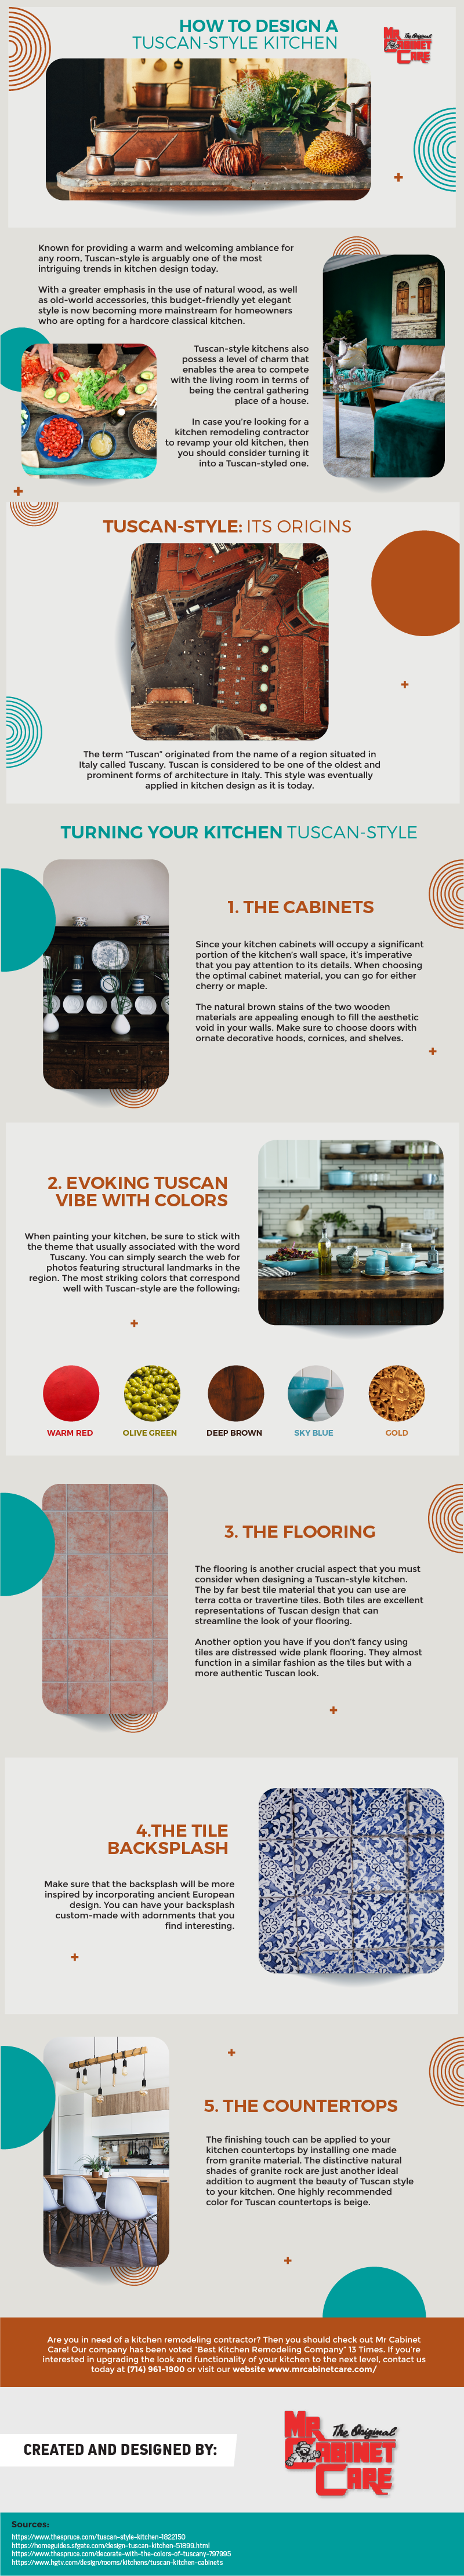 How to Design a Tuscan-Style Kitchen Infographic